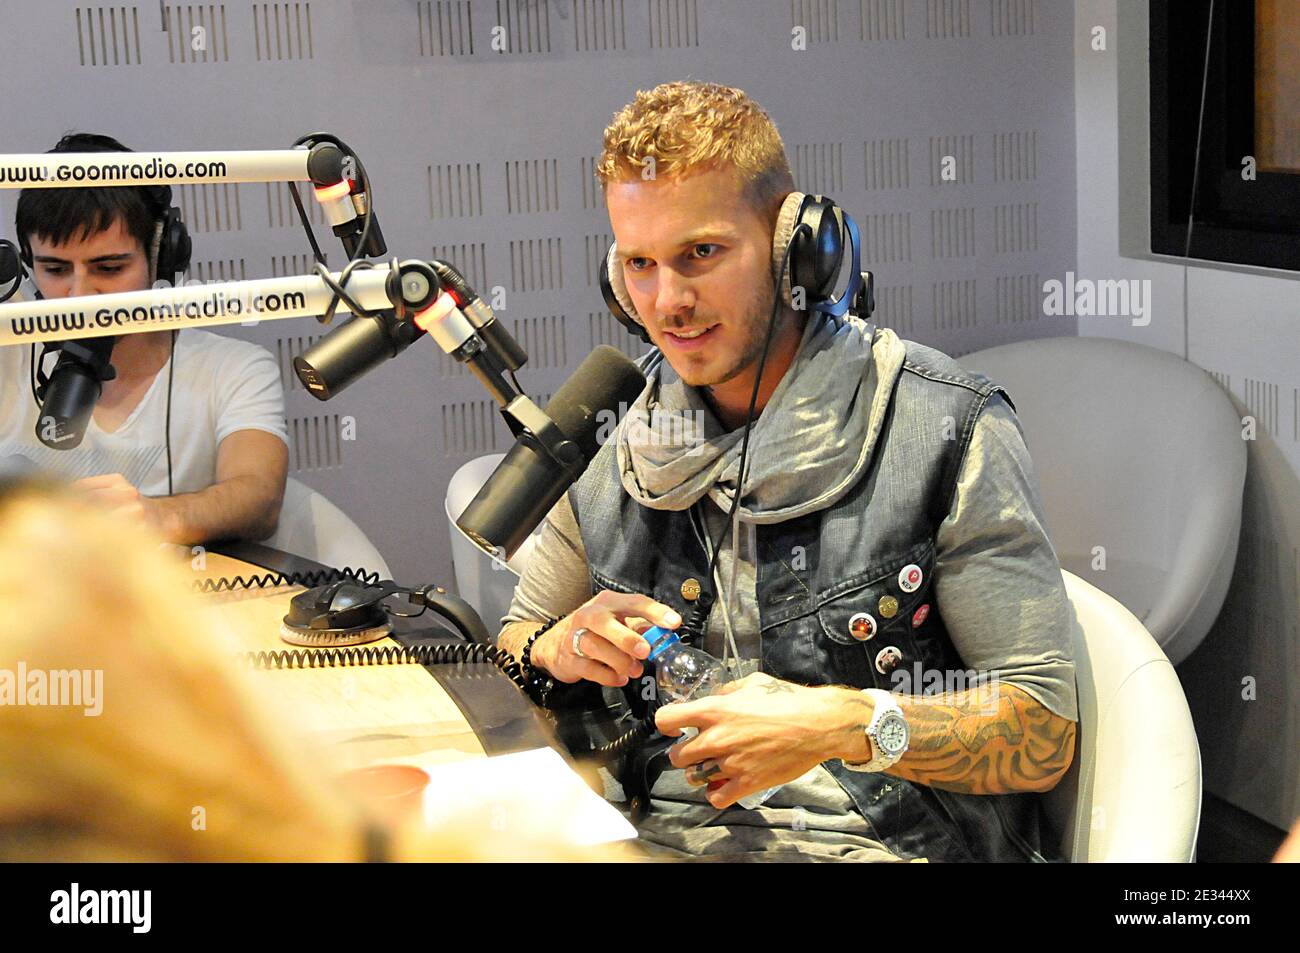 French singer M. Pokora attends 'MIKL' radio show on Goom radio at the  Maison de la Radio in Paris, France on September 24, 2010. Photo by Thierry  Plessis/ABACAPRESS.COM Stock Photo - Alamy